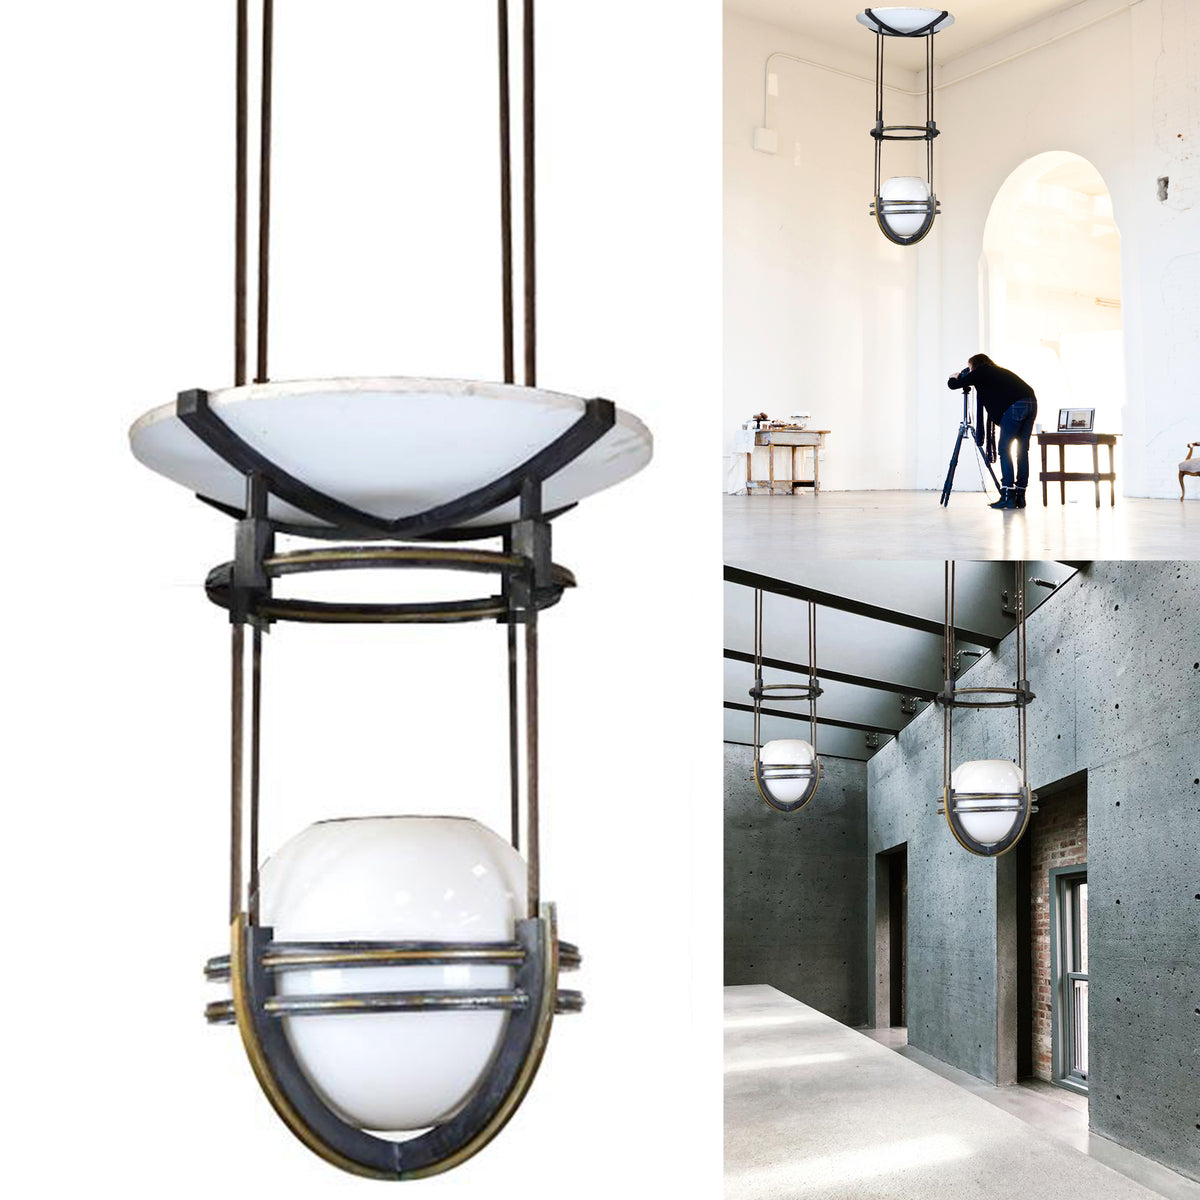 Large Art Deco Style Suspended Lighting | The Architectural Forum